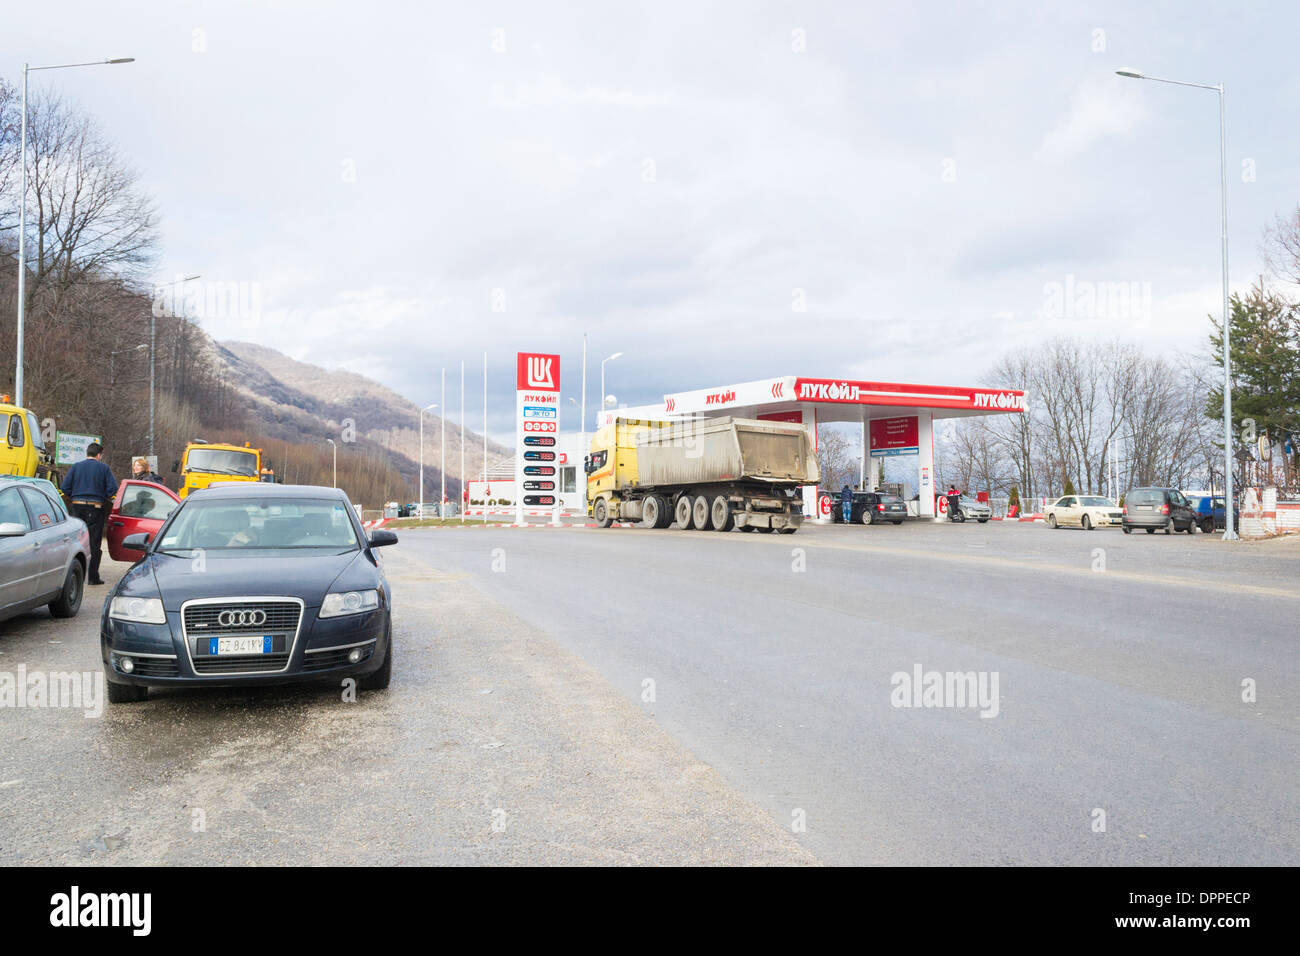 Truck in front of Lukoil gas station - Straja halt on a mountain gorge on the road between Skopje and Ohrid, Macedonia / FYROM Stock Photo